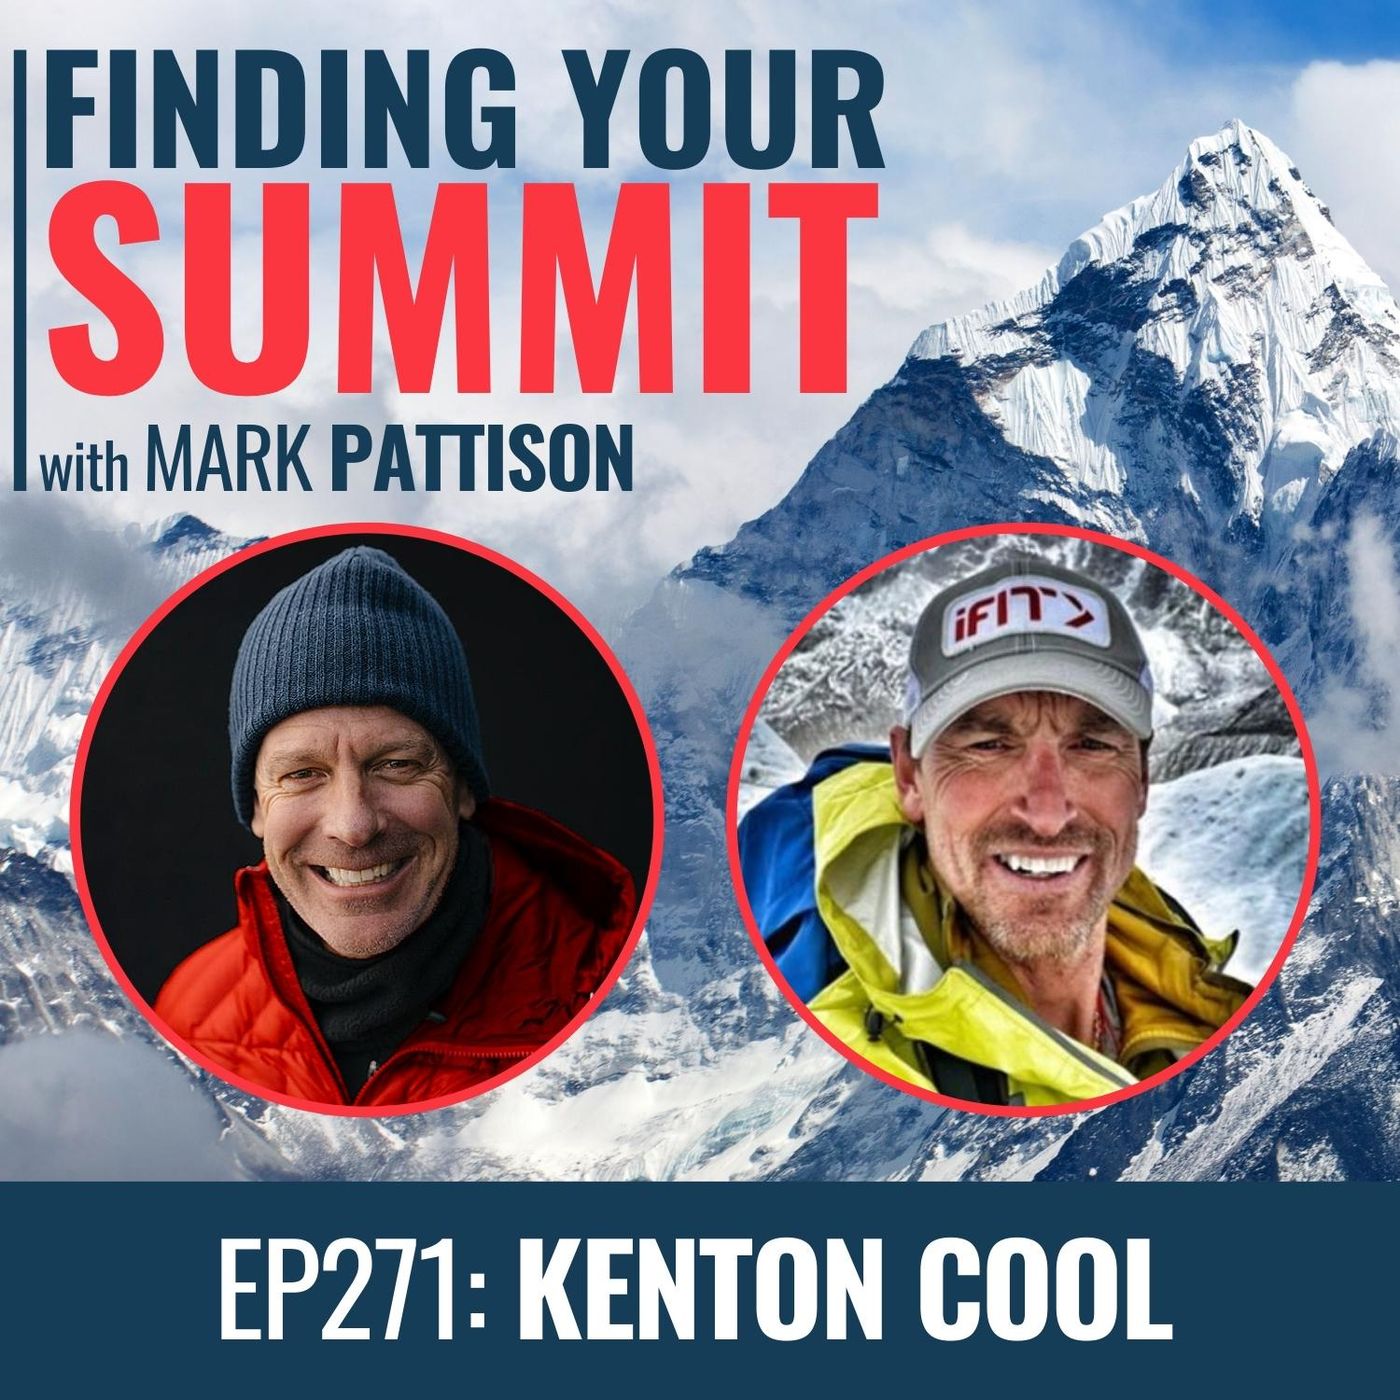 EP 271: Kenton Cool.  The super hero who climbed MT EVEREST 14 times with no end in sight.